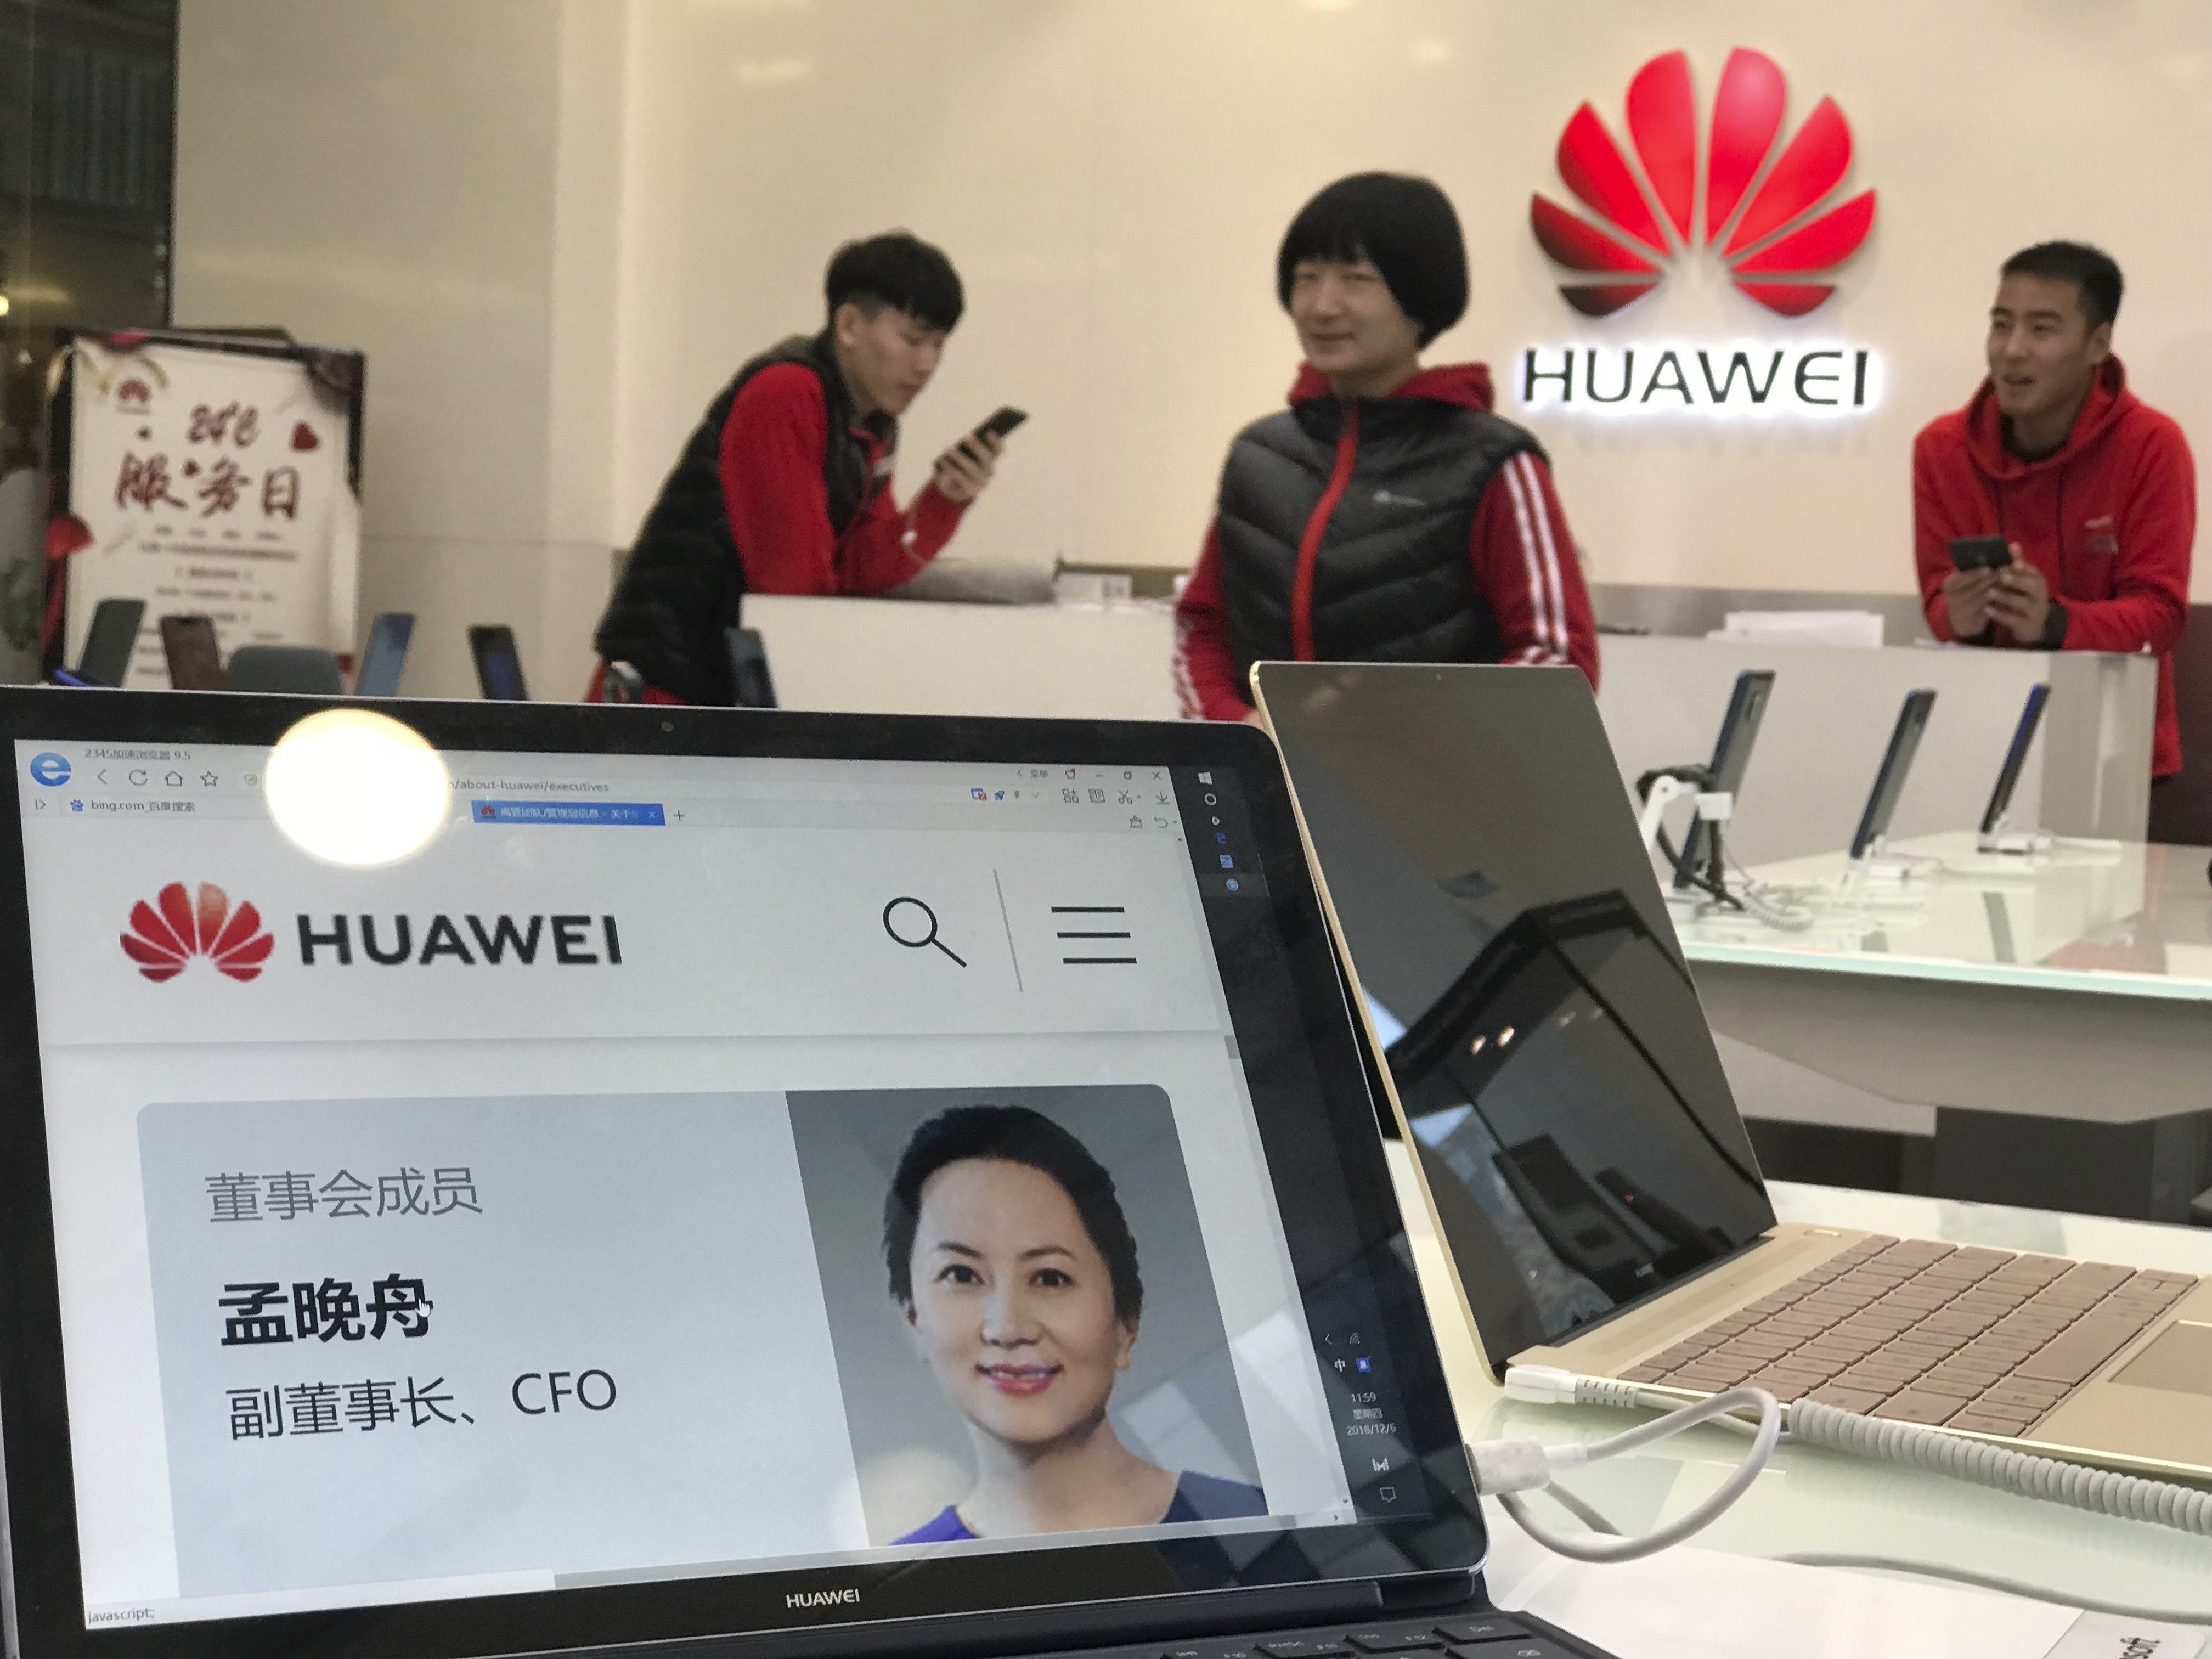 Meng Wanzhou’s arrest comes as Huawei faces rising hostility in the international marketplace. Photo: AP